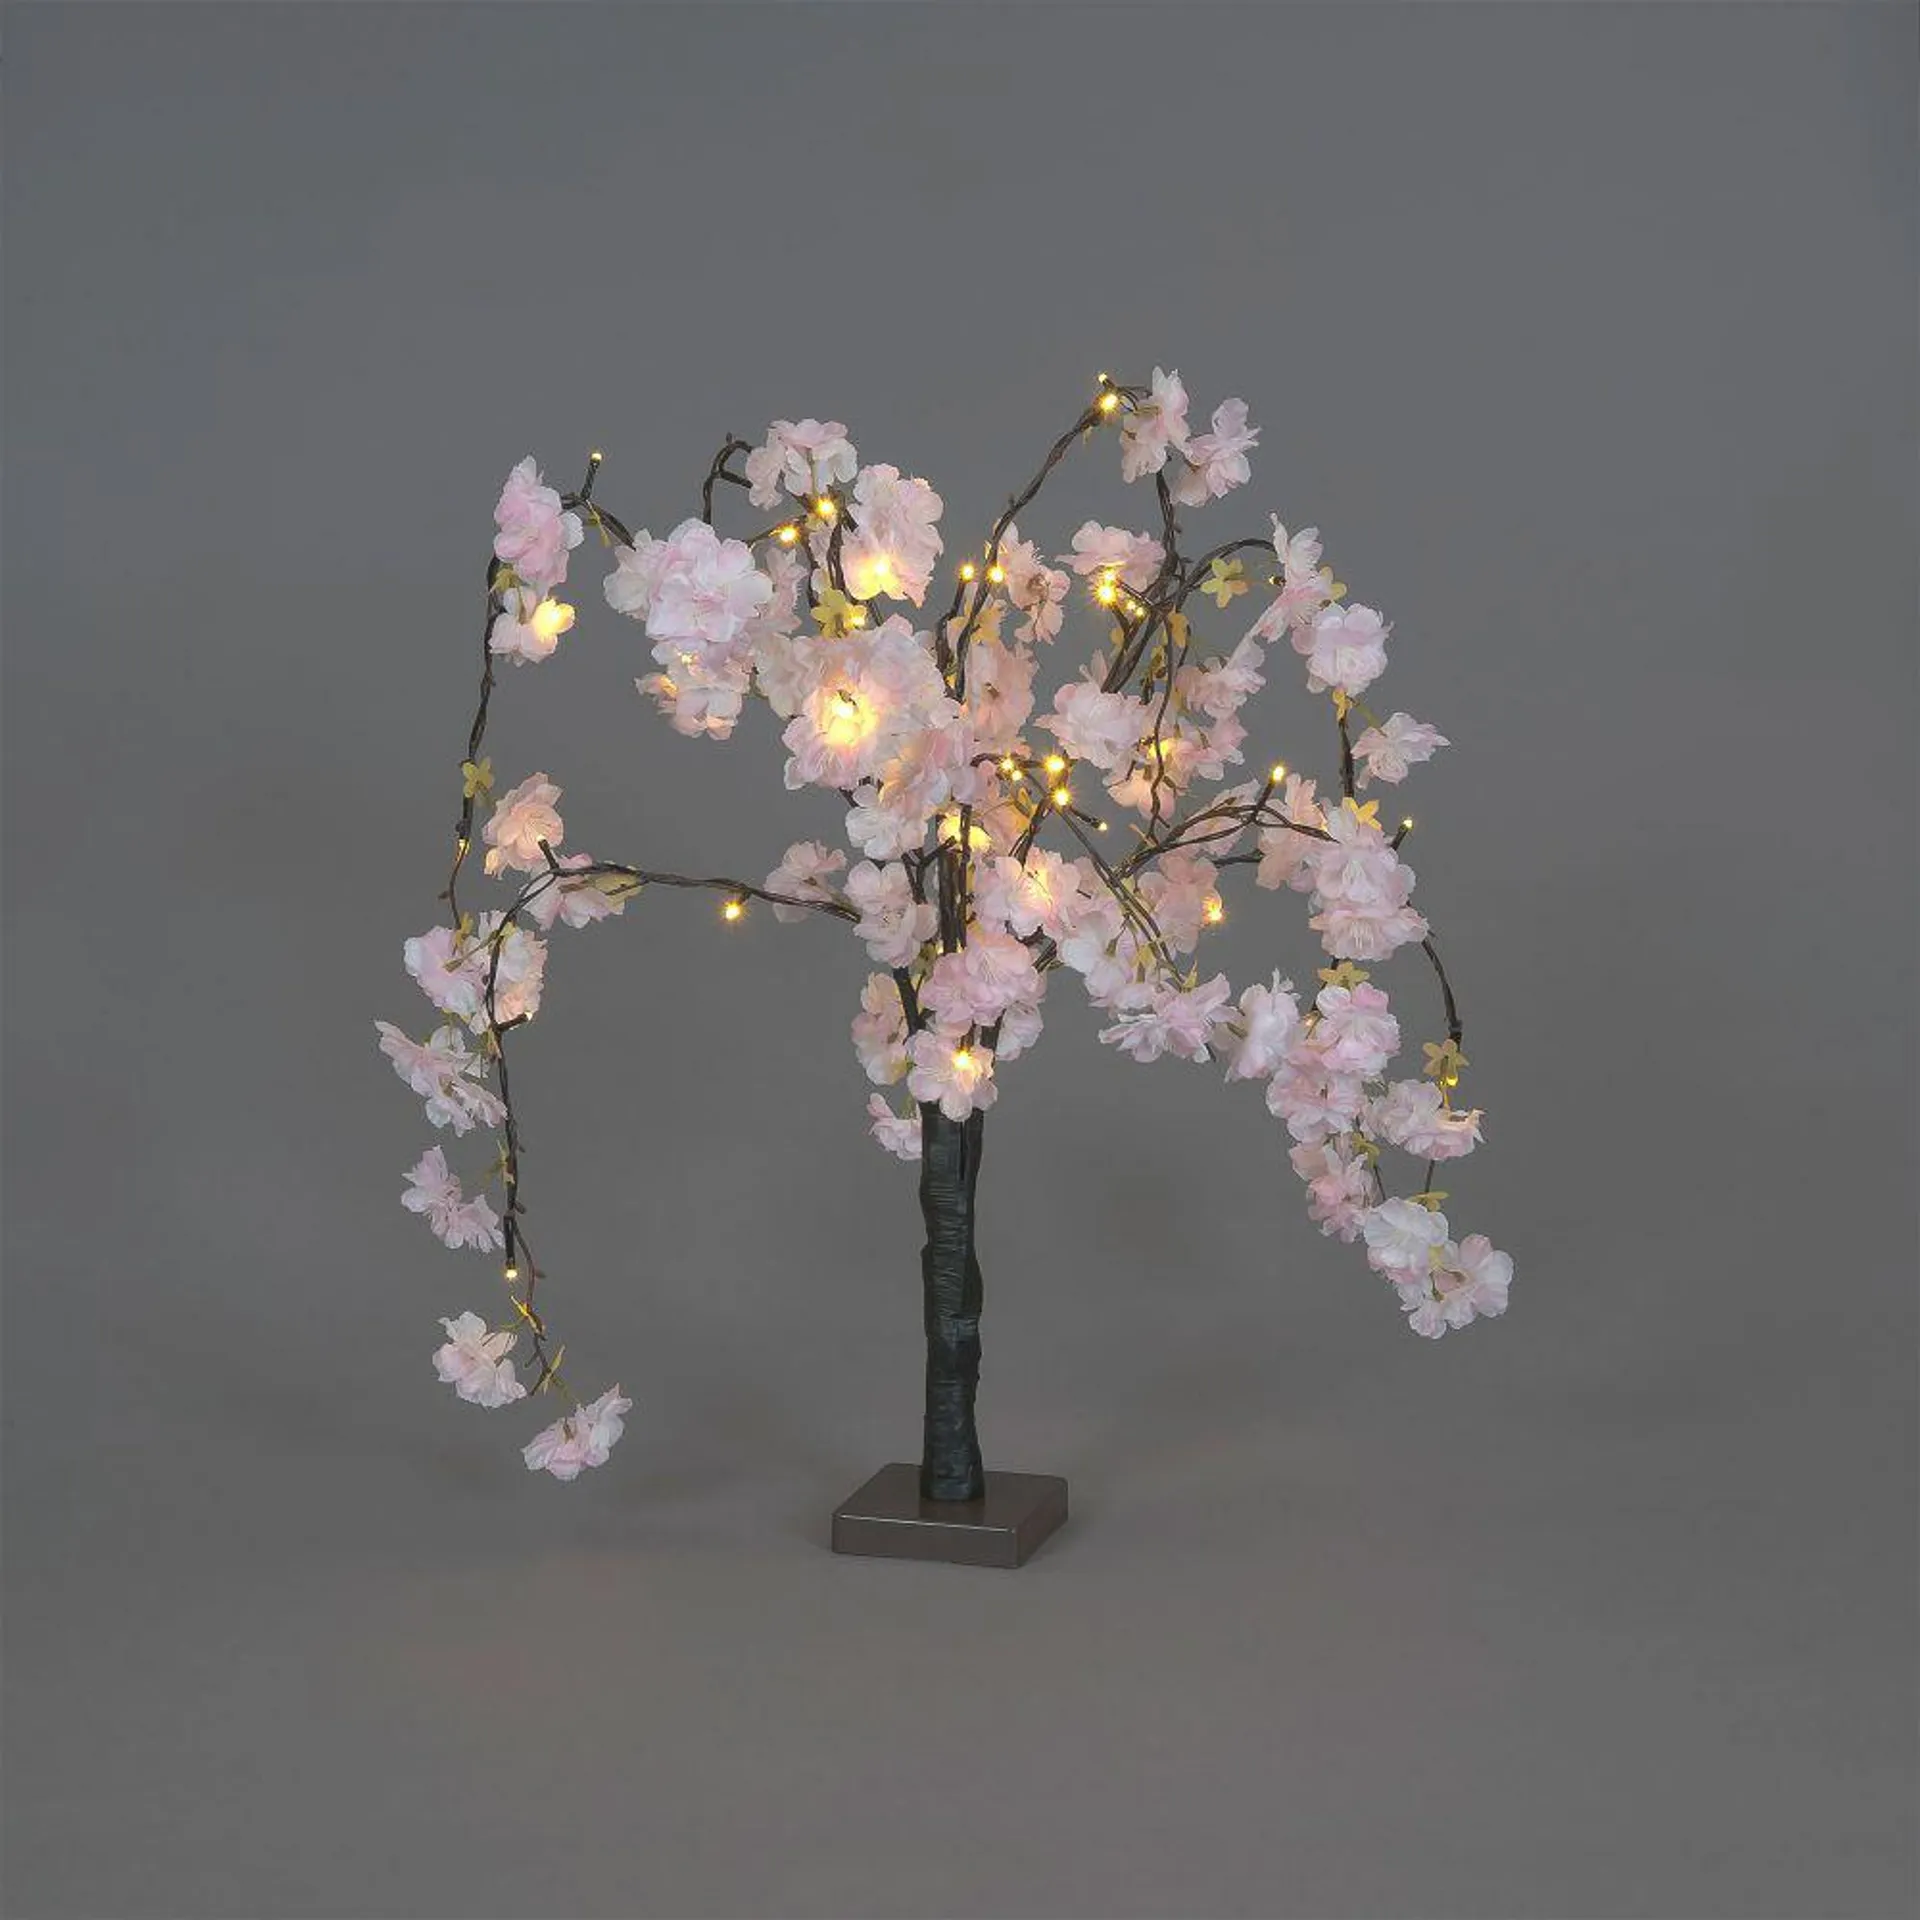 60m Cherry Blossom Tree With 48 Pale Pink Flowers